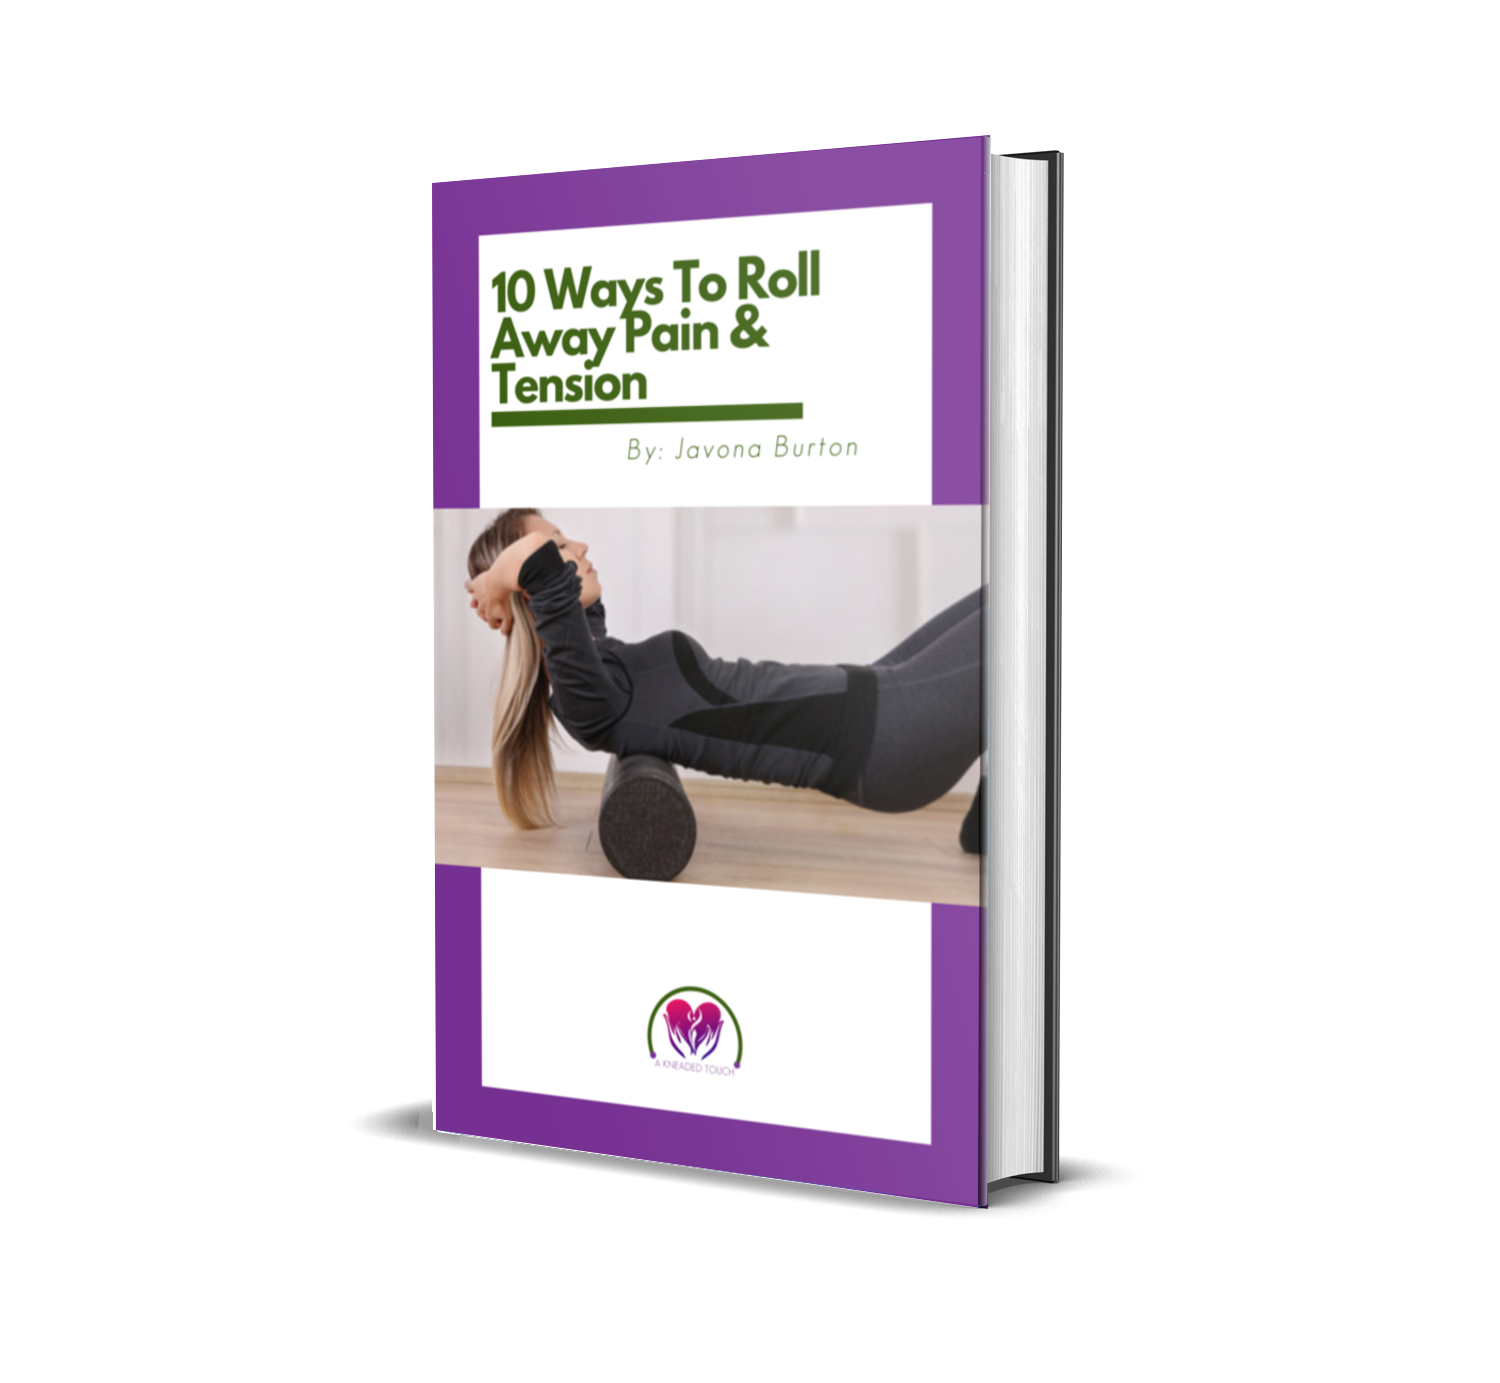 10 WAYS TO ROLL AWAY PAIN & TENSION